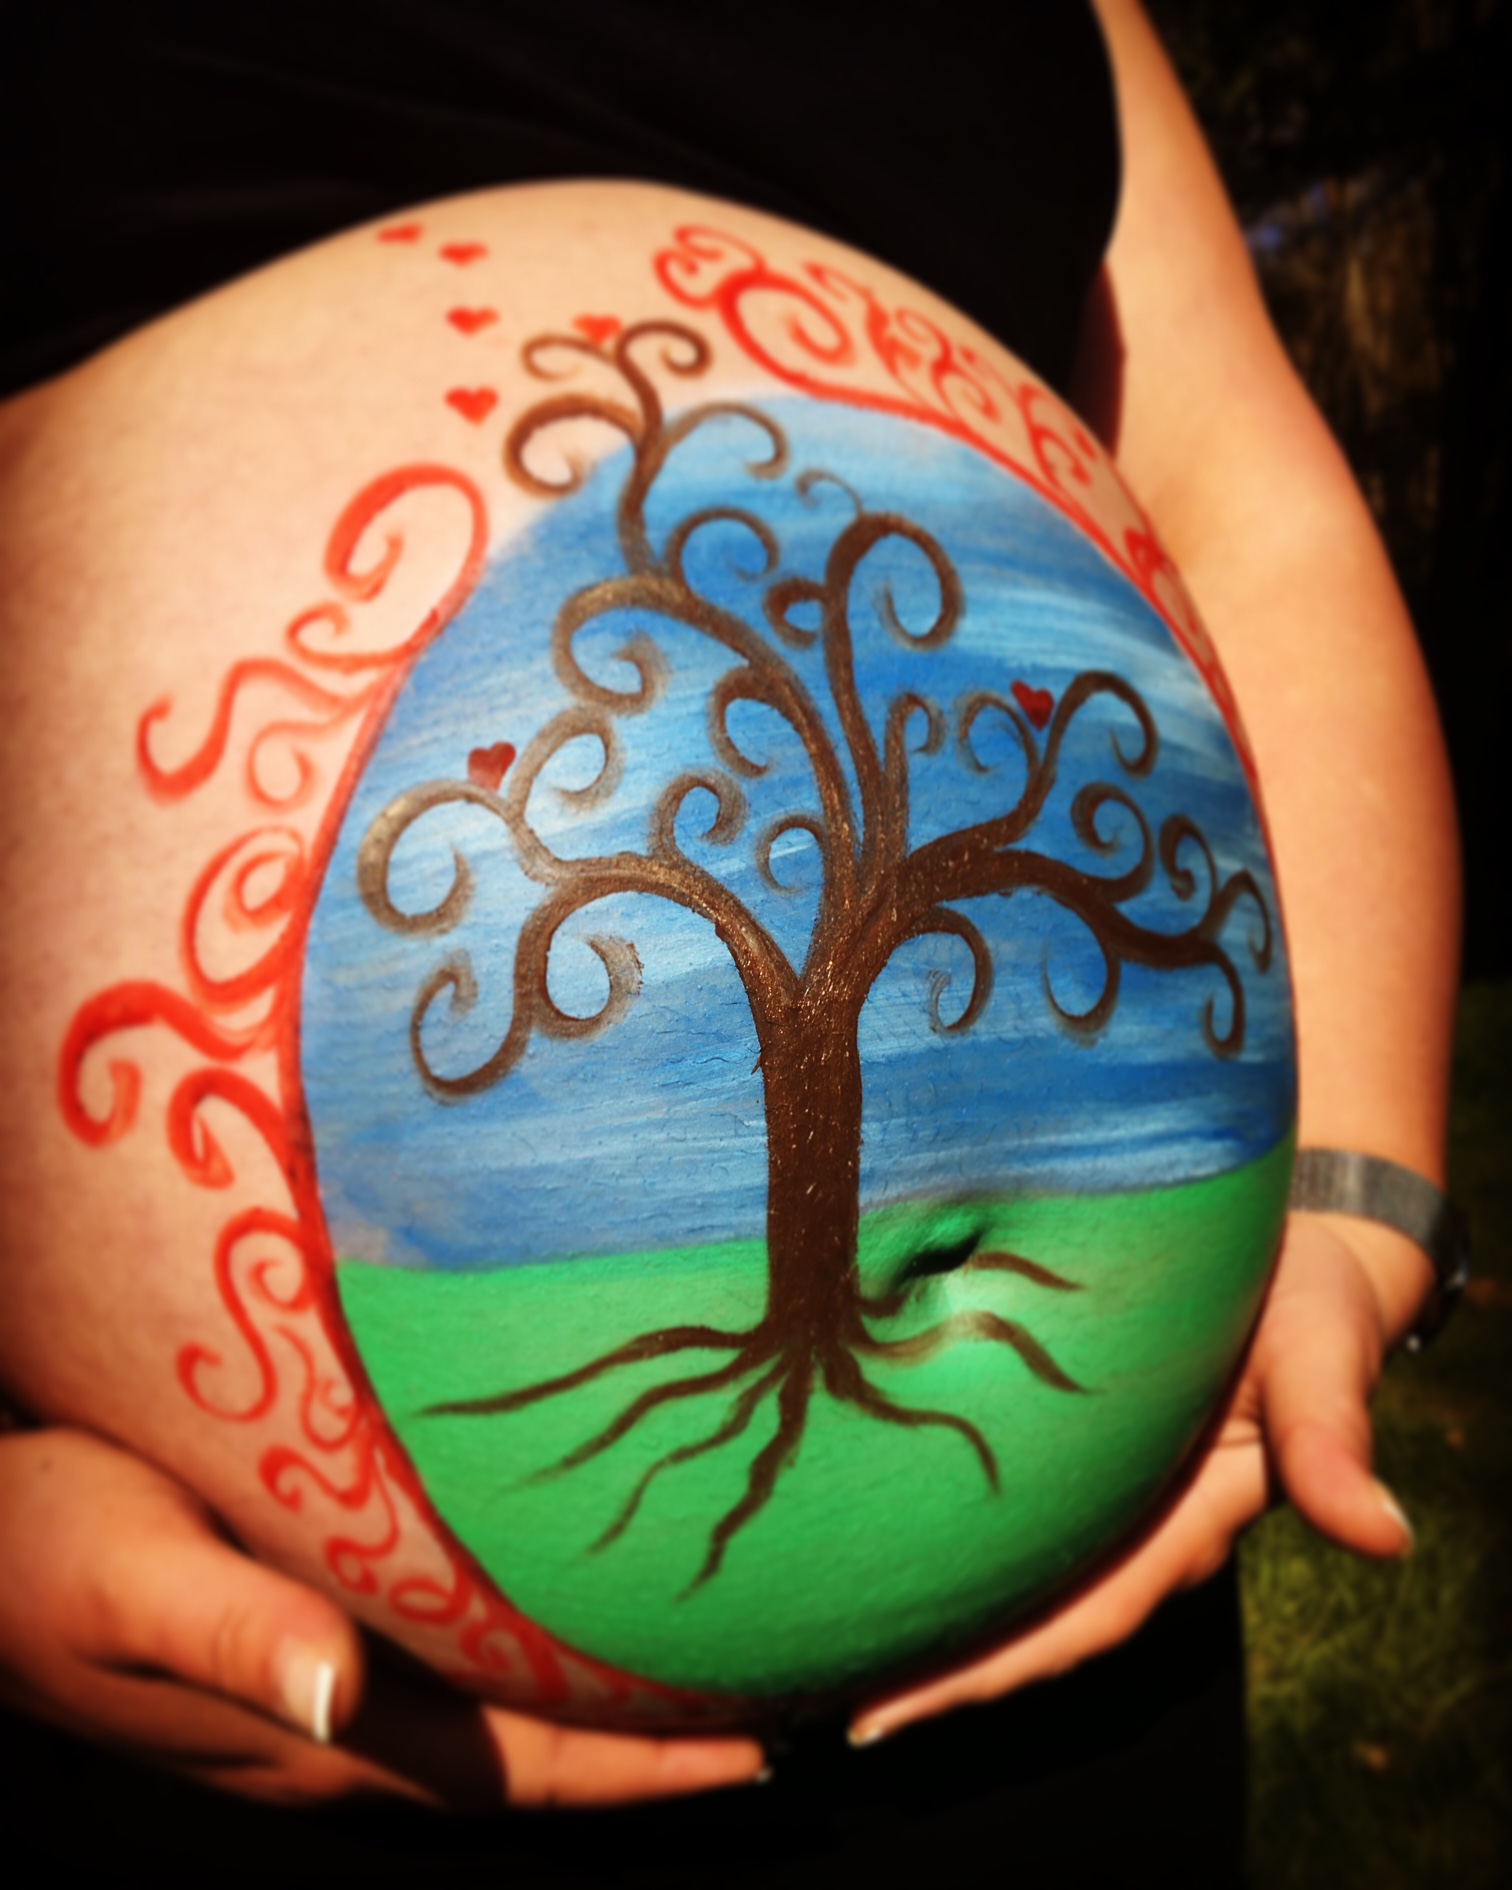 Belly painting avec une doula